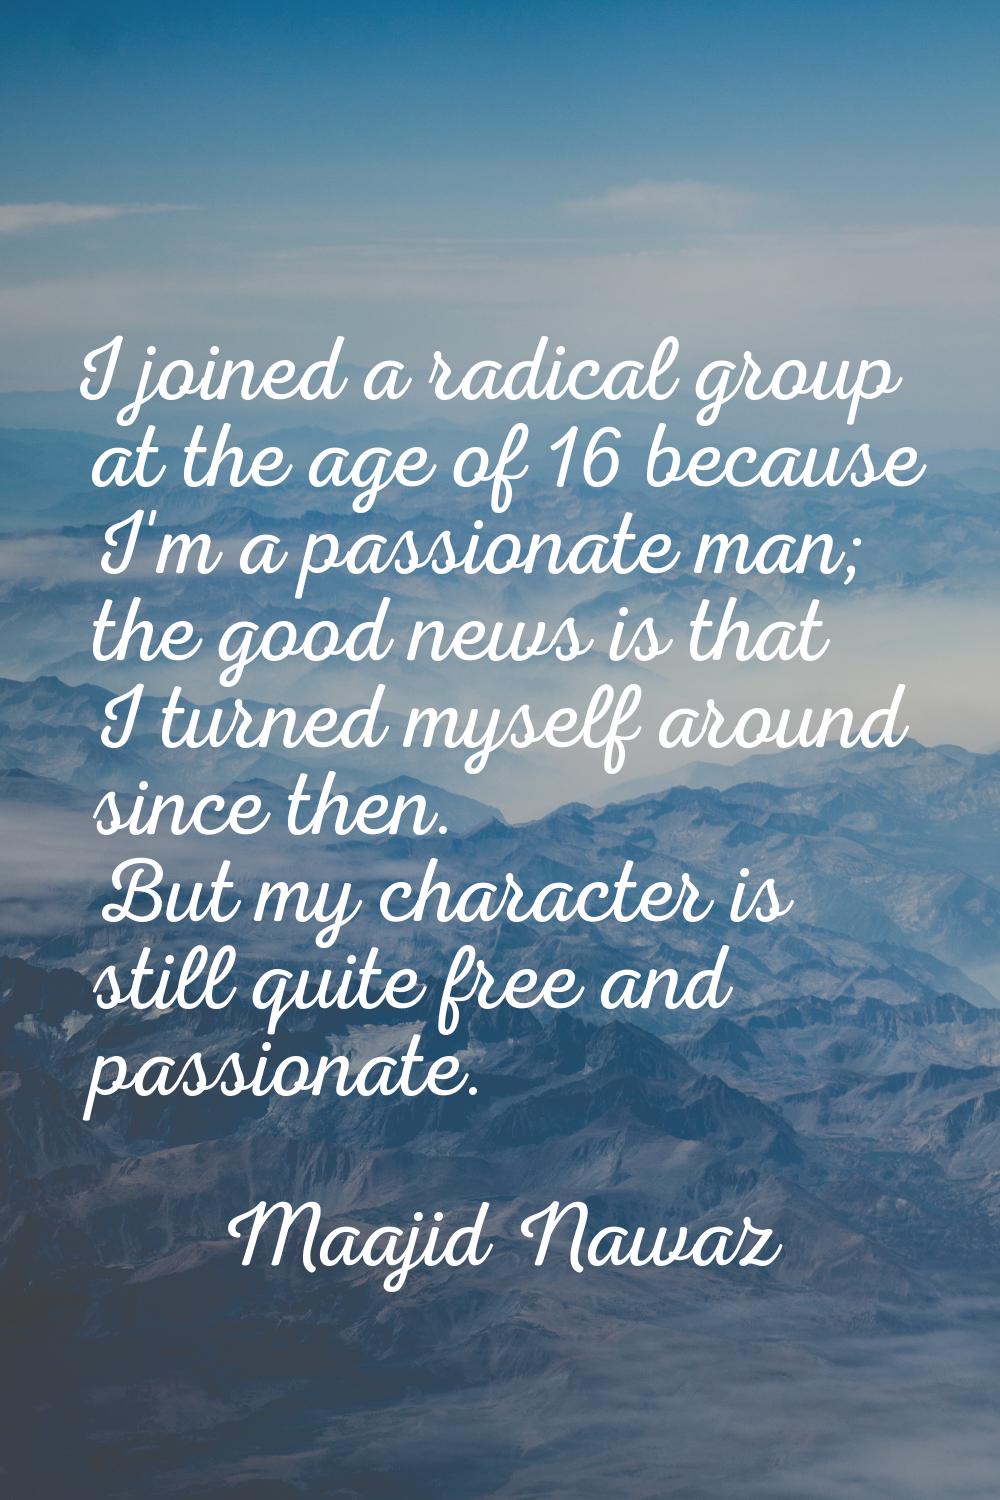 I joined a radical group at the age of 16 because I'm a passionate man; the good news is that I tur